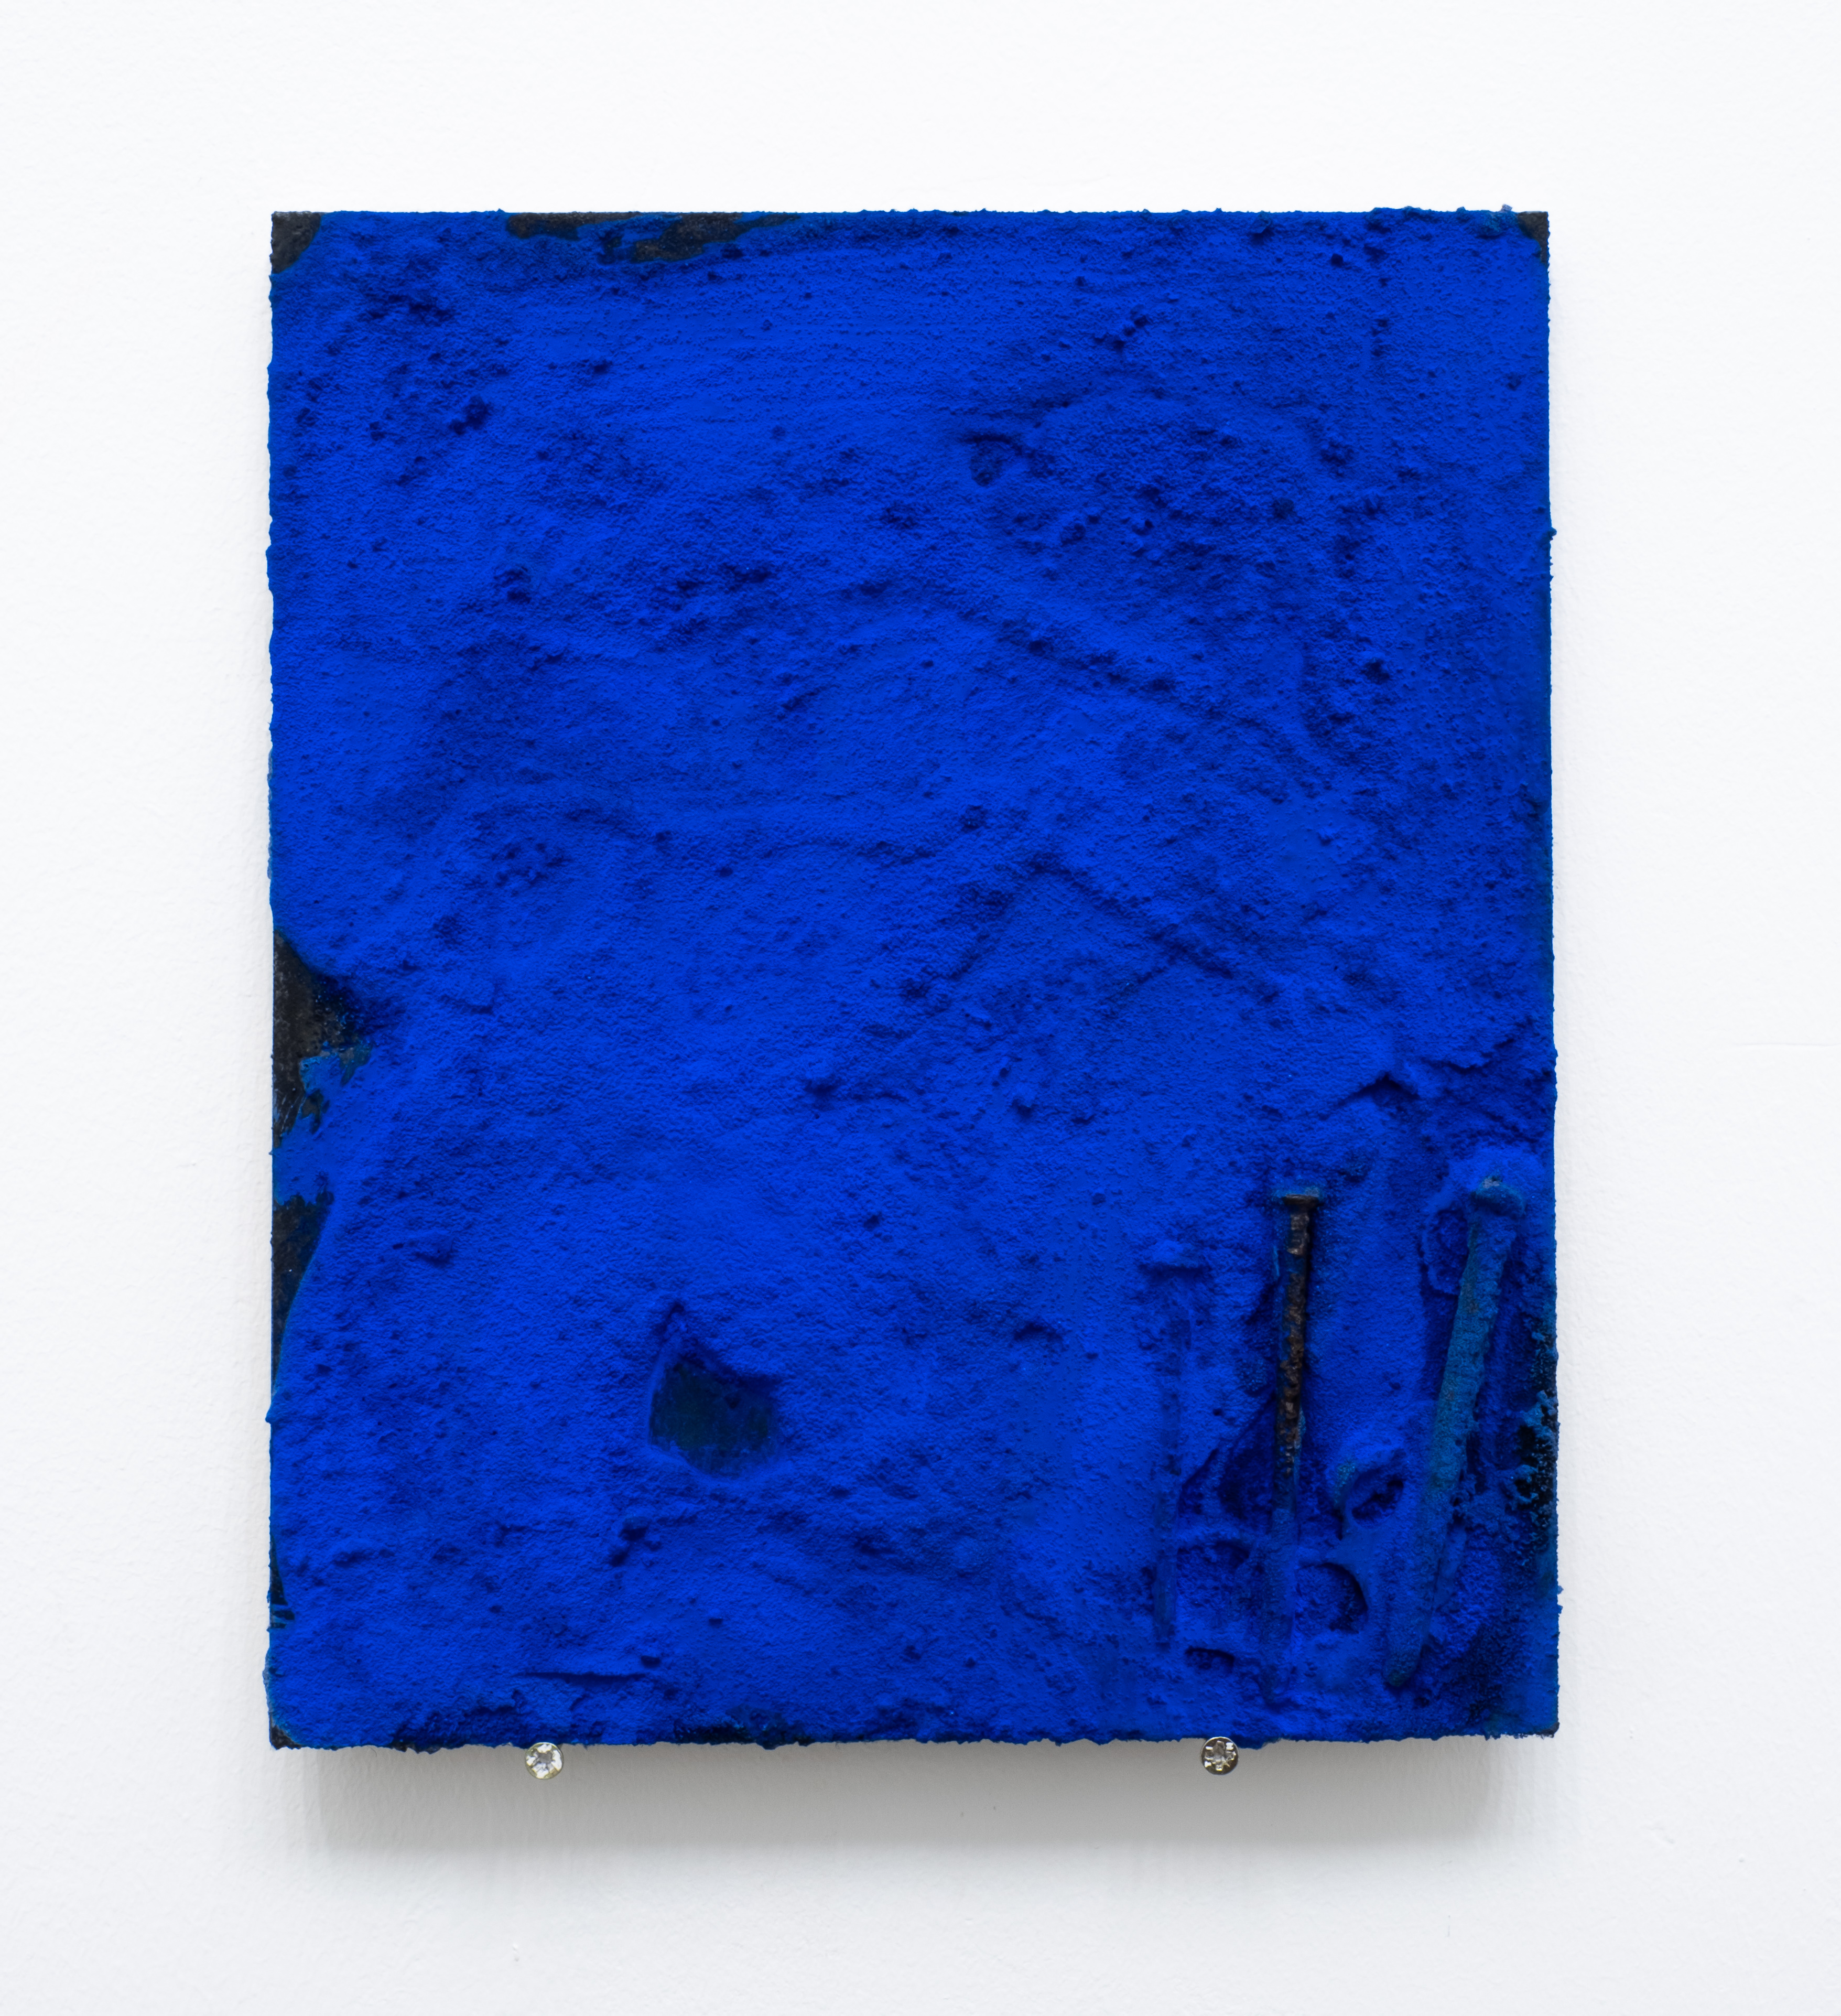 <b>Title: </b>La sombra del azul<br /><b>Year: </b>2021<br /><b>Medium: </b>Salt, wood glue, rusted nails, ink, and pigment on wood<br /><b>Size: </b>22 x 34 cm